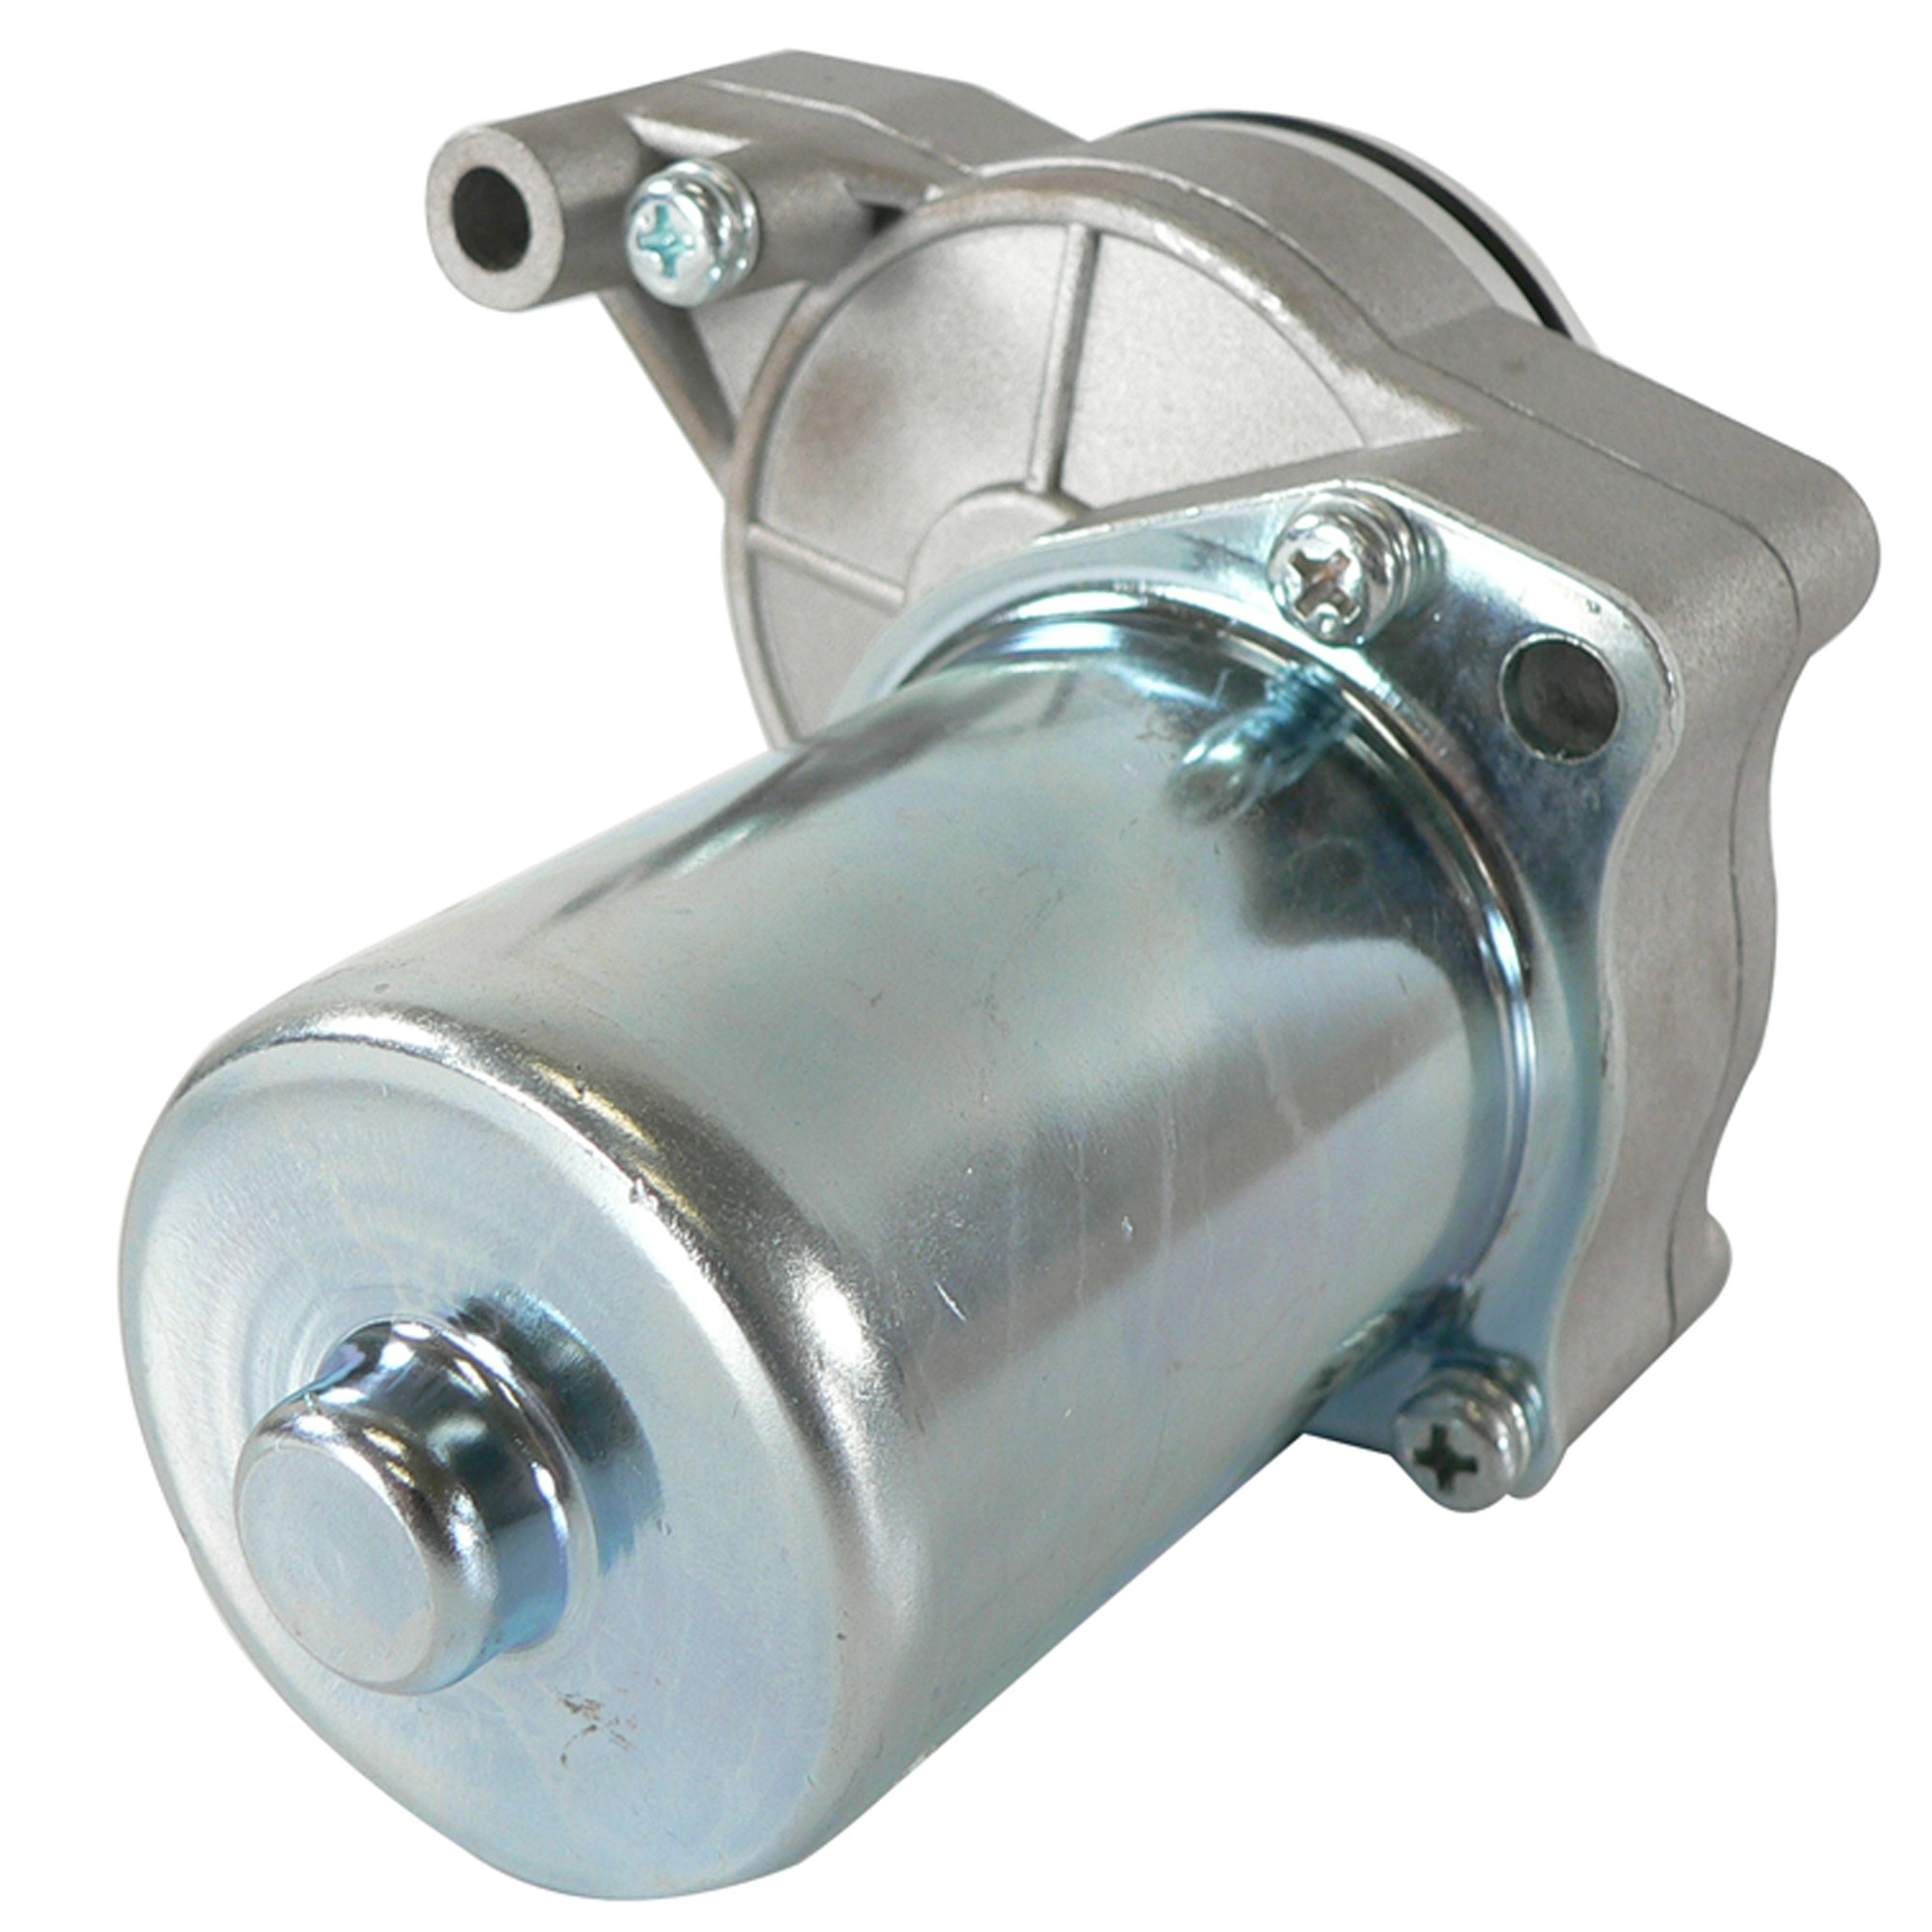 DB Electrical New Starter 410-58006 for Go Scoot Atv Kat 150 Lacoste 110 150 Panda 110 - image 3 of 5